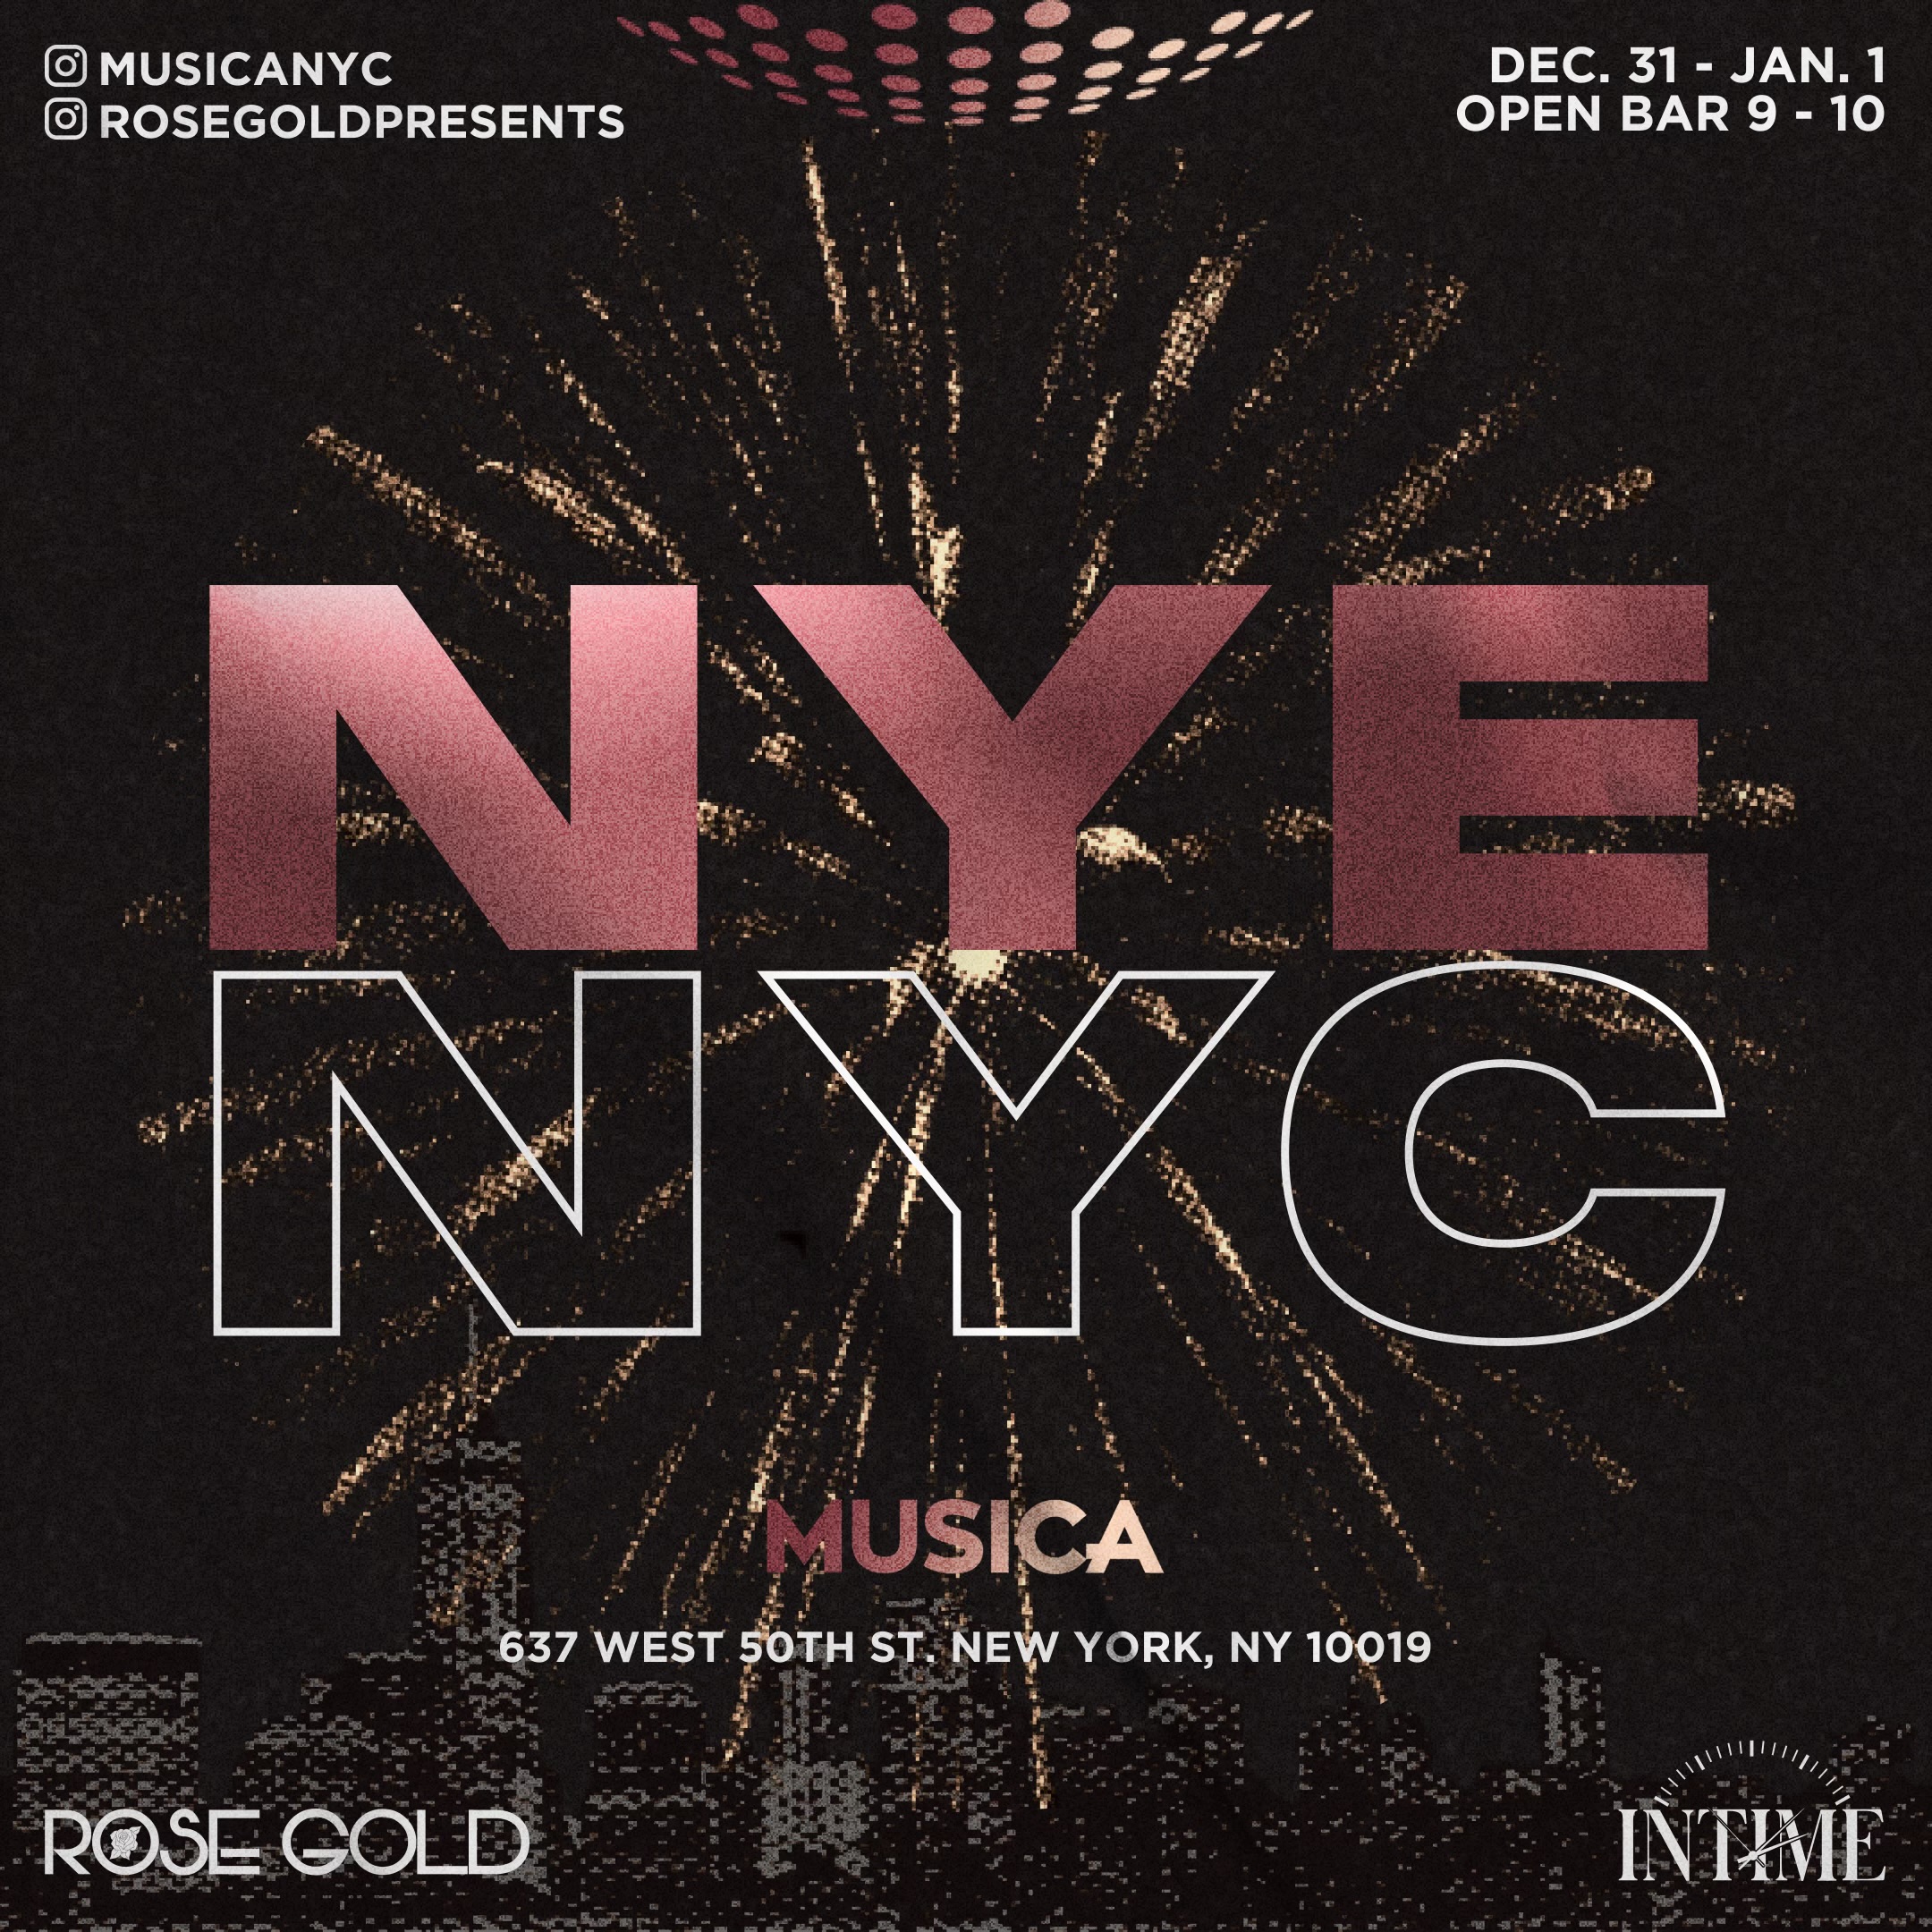 New Year's Eve at Musica